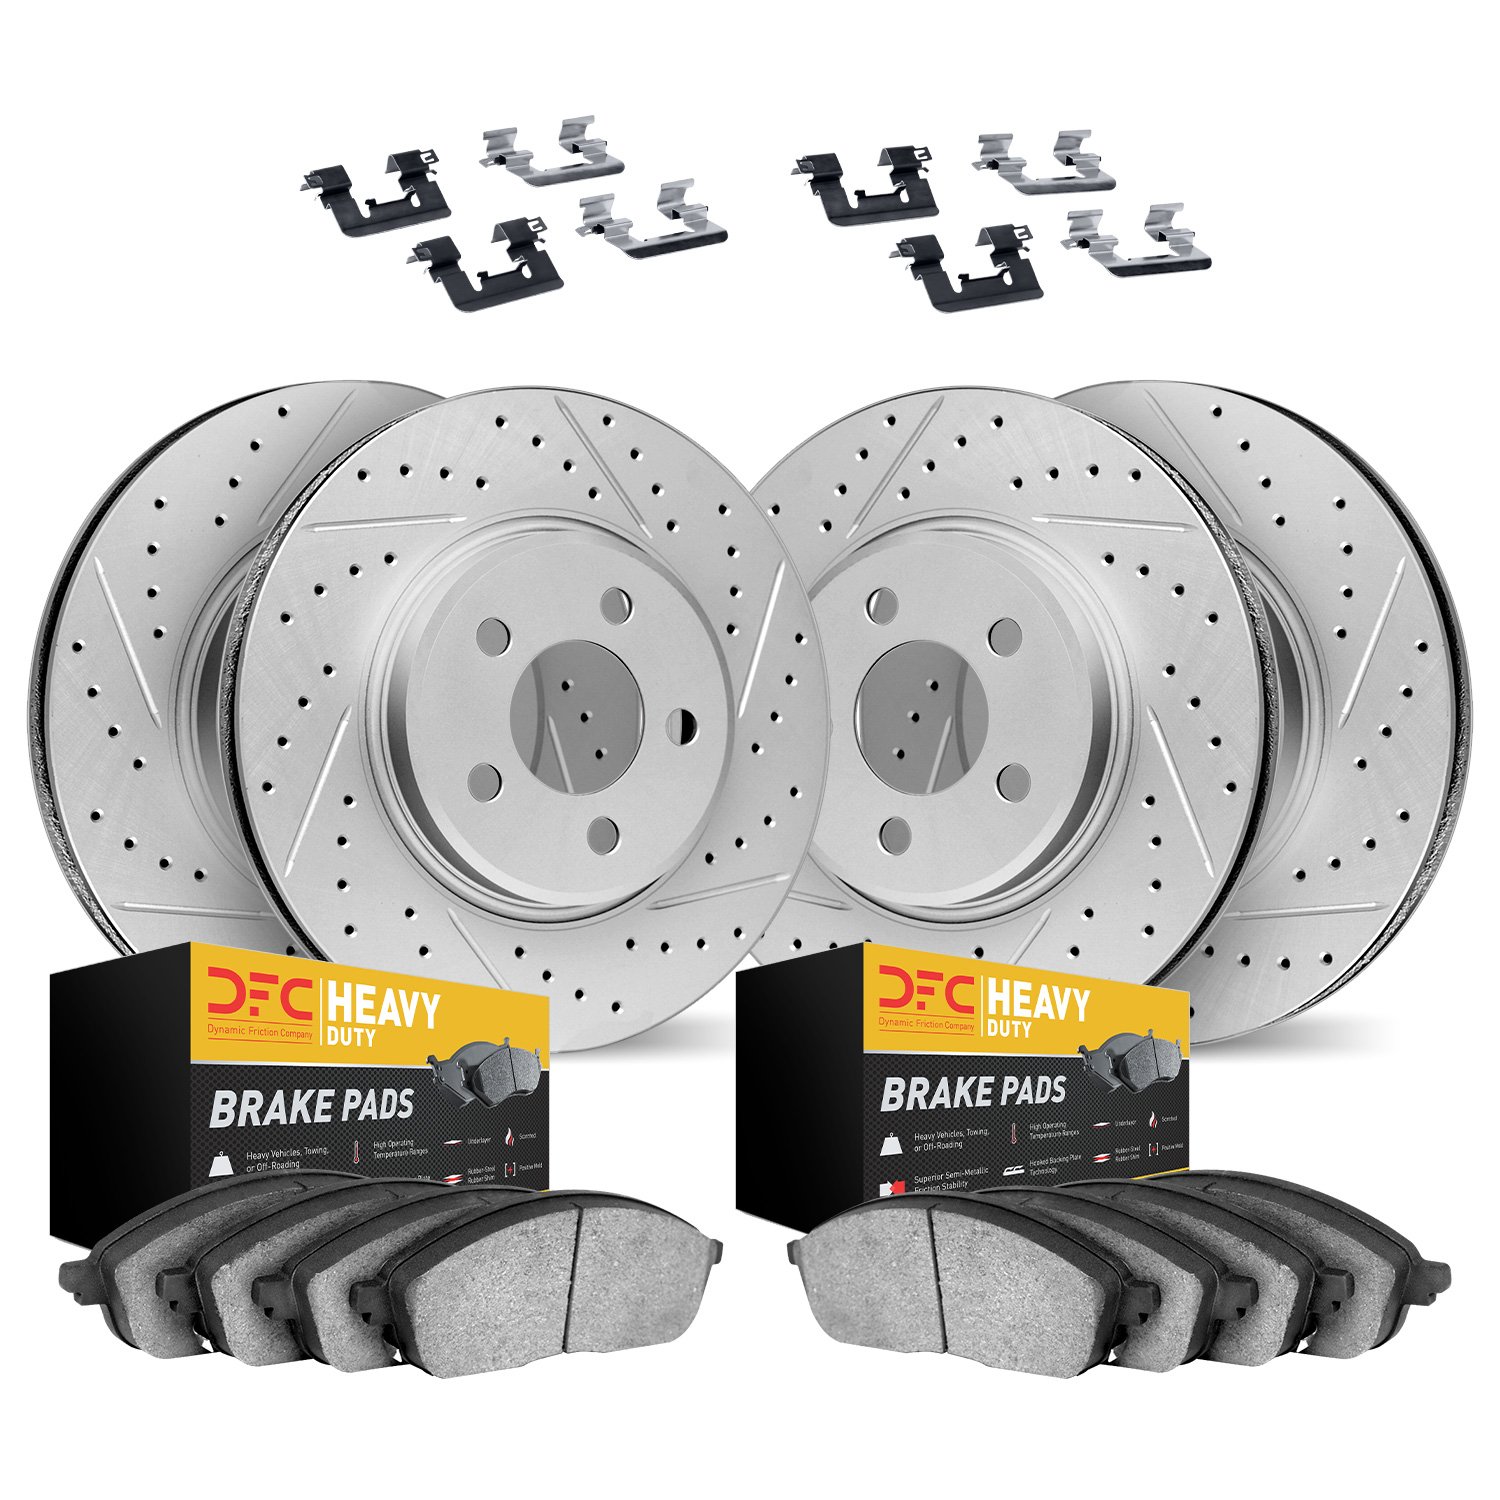 2214-56008 Geoperformance Drilled/Slotted Rotors w/Heavy-Duty Pads Kit & Hardware, 2003-2011 Ford/Lincoln/Mercury/Mazda, Positio